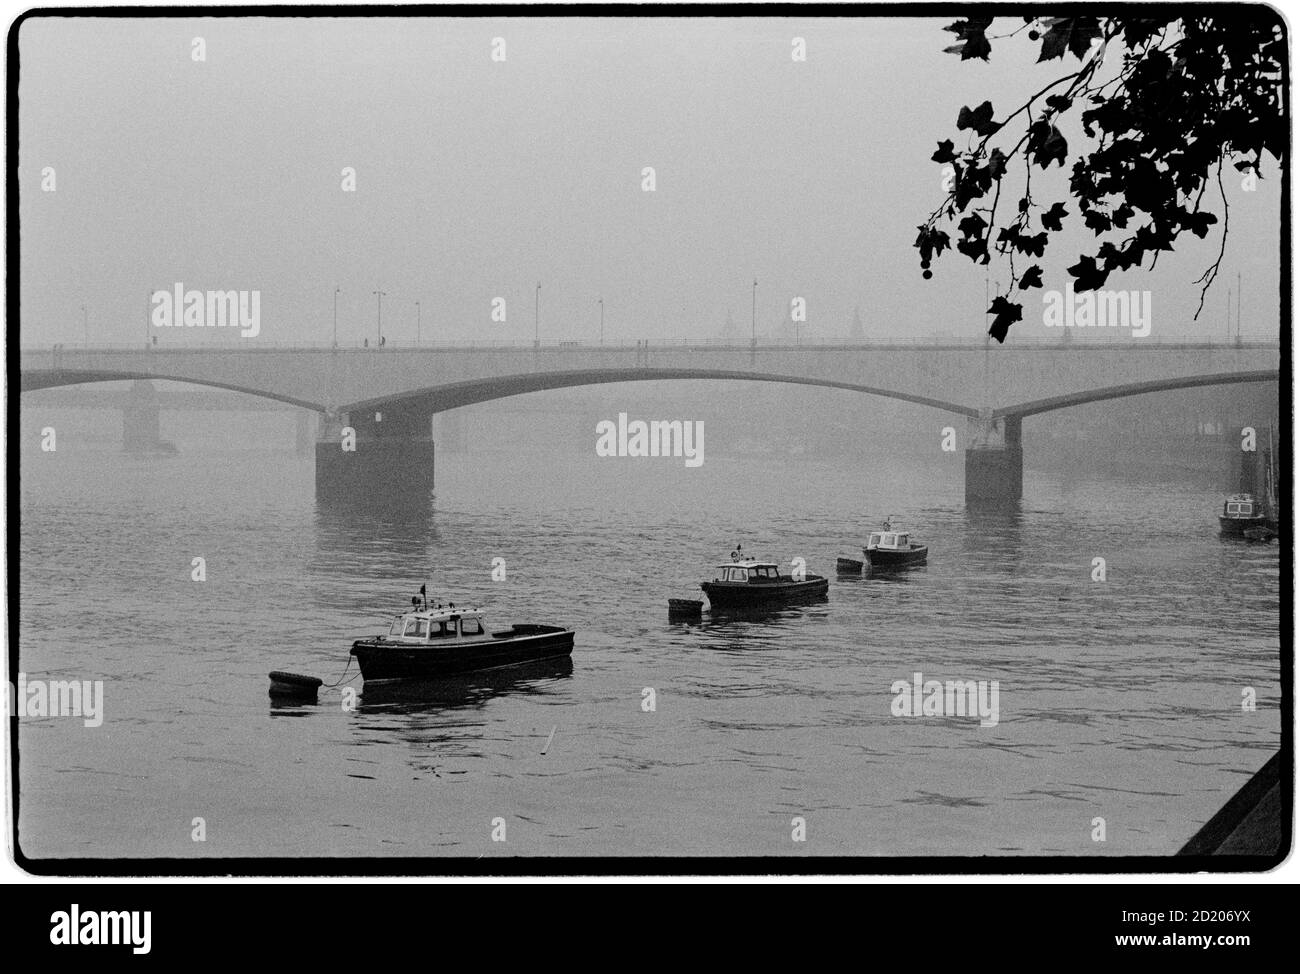 London views in the mist November 1968 The River Thames, London England in misty foggy conditions. Waterloo Bridge Stock Photo